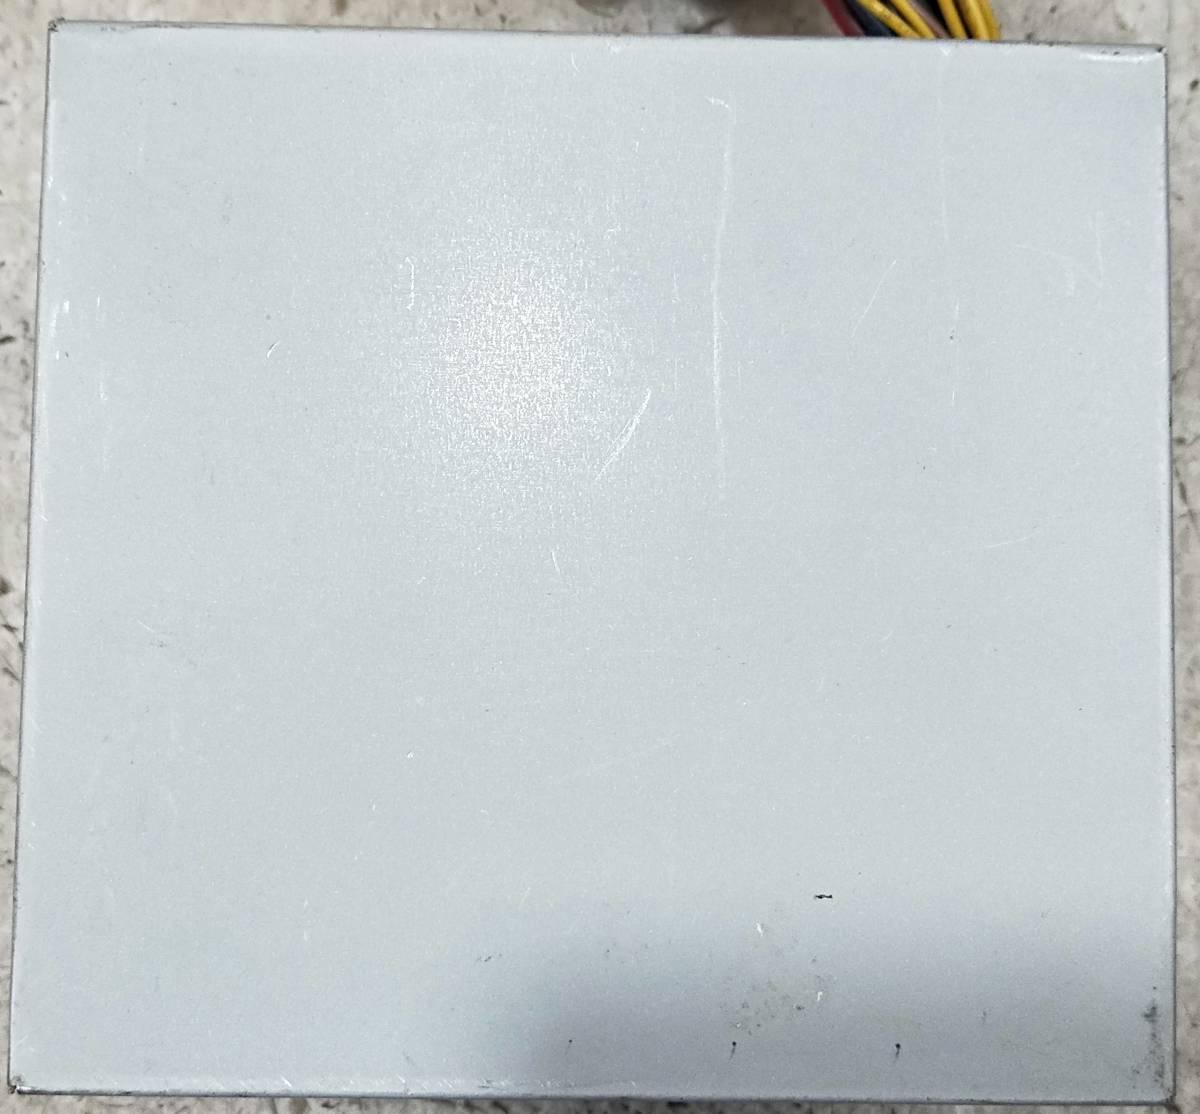 [ used parts ] DELL DPS-46DB-10 A 460W power supply unit power supply BOX #DY2583